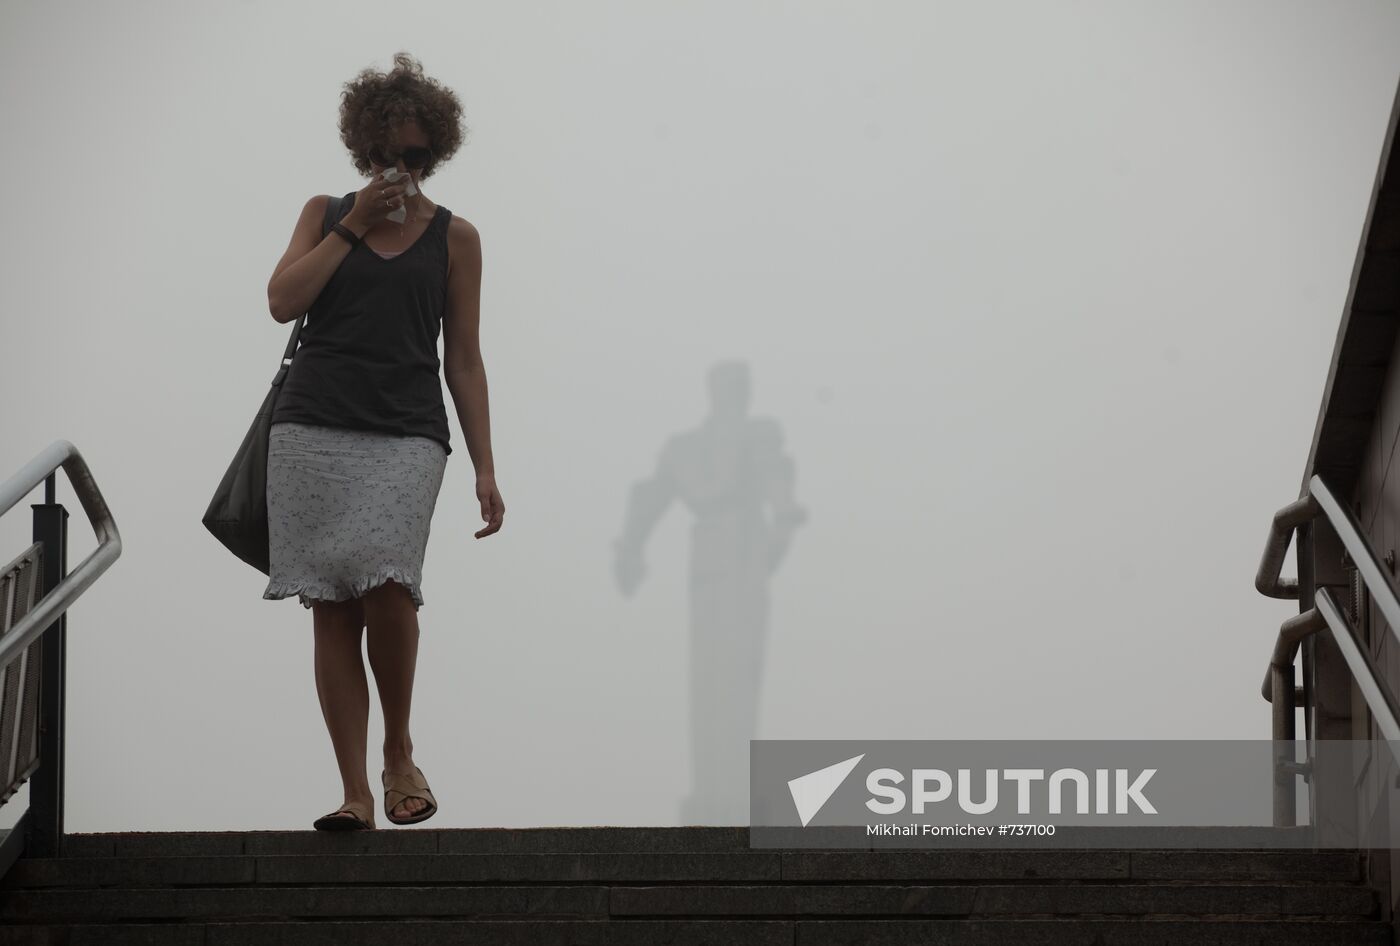 Moscow shrouded in wildfire smoke